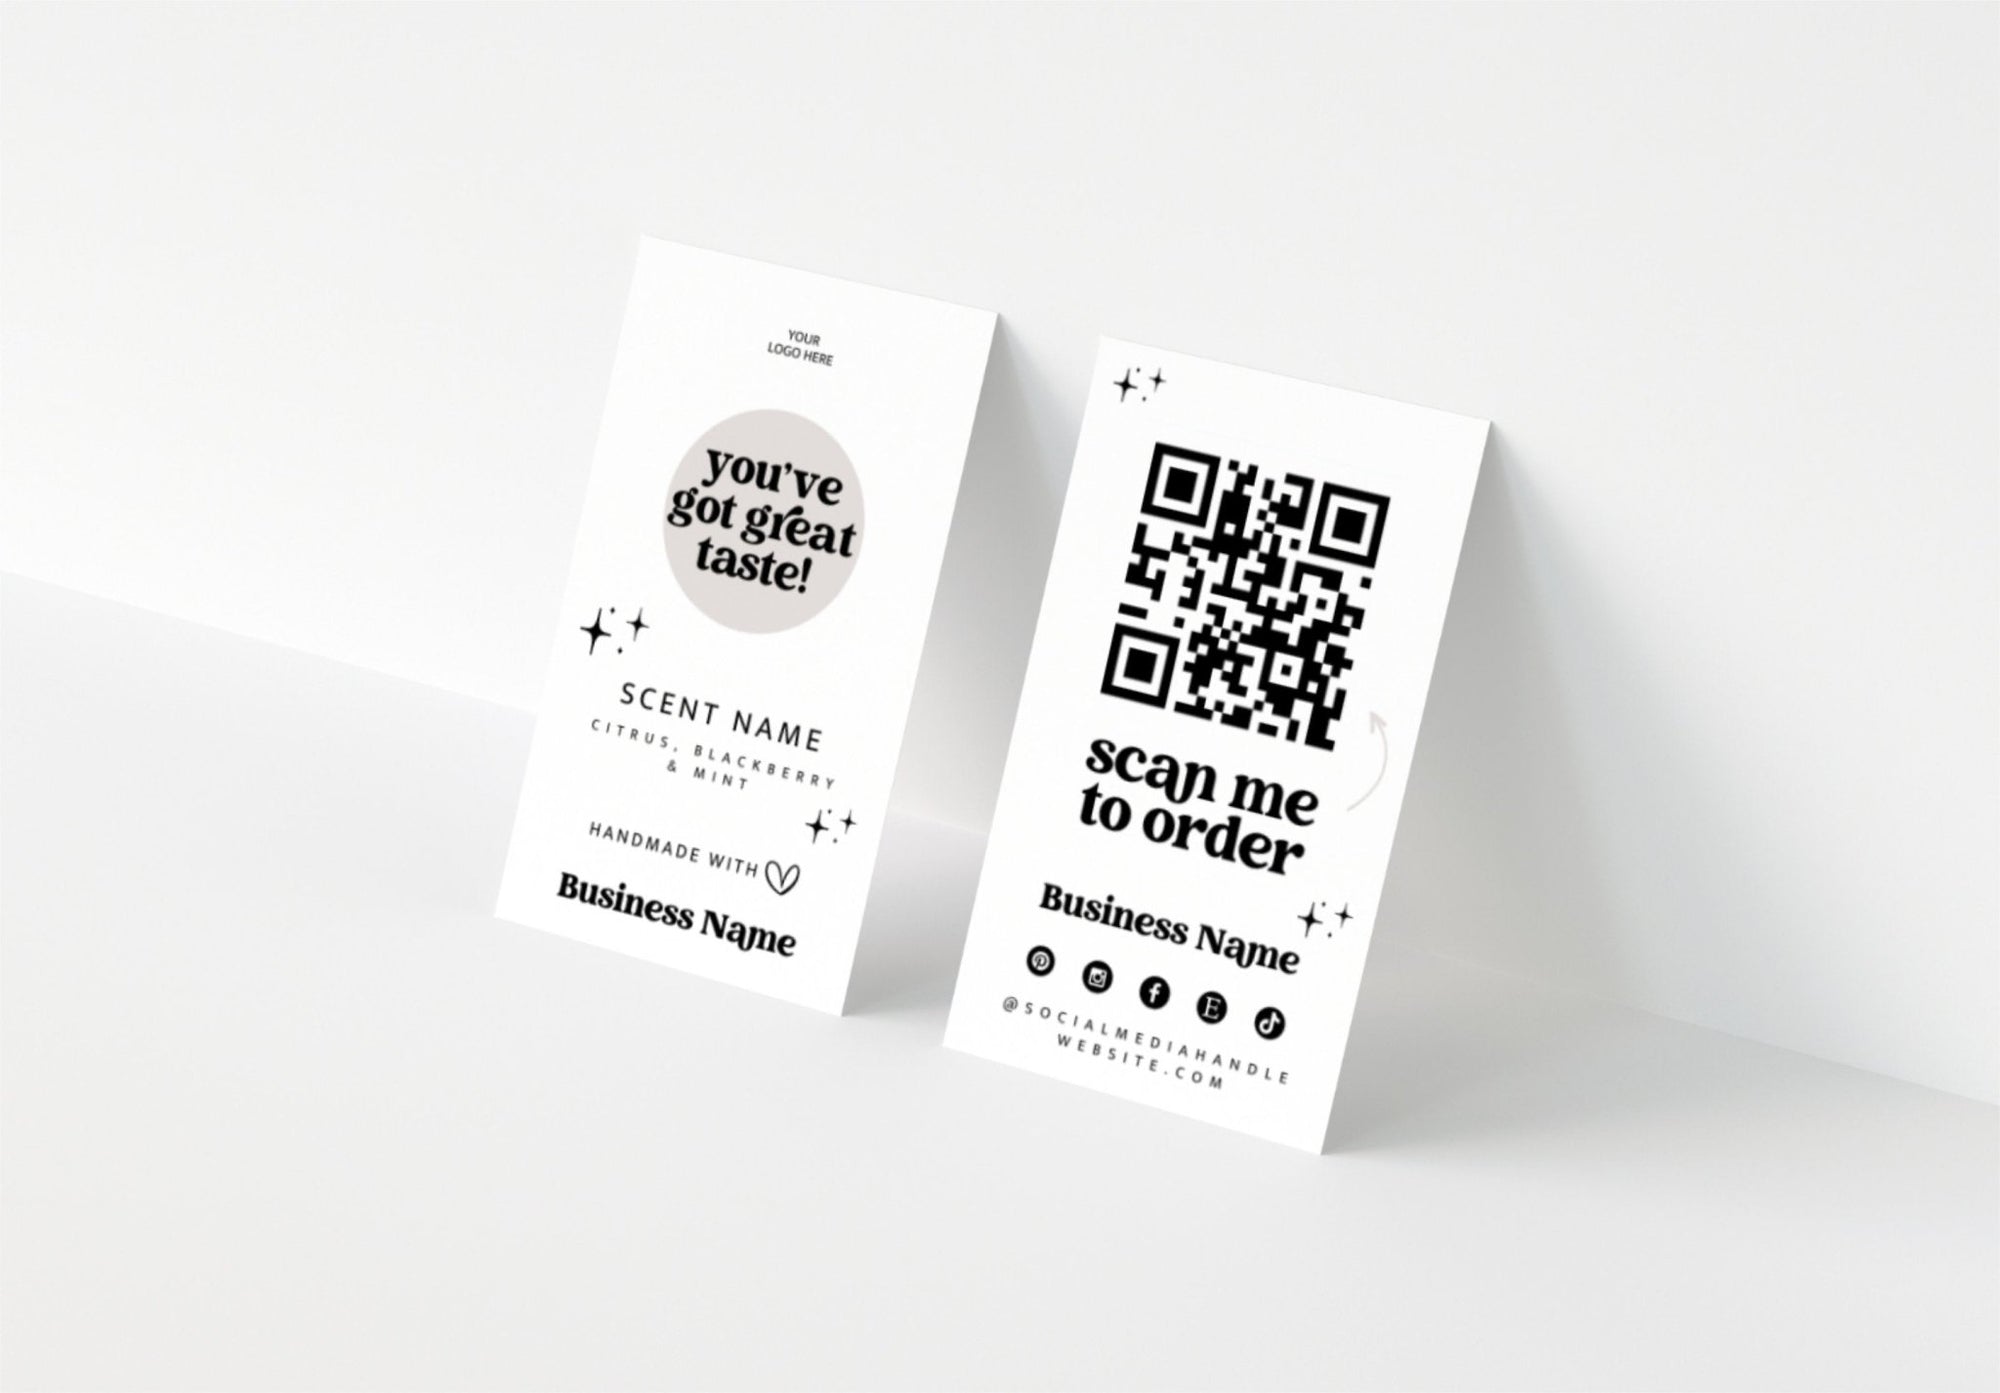 Retro Candle Scent Sampler Business Card with QR Code Canva Template | Dani - Trendy Fox Studio